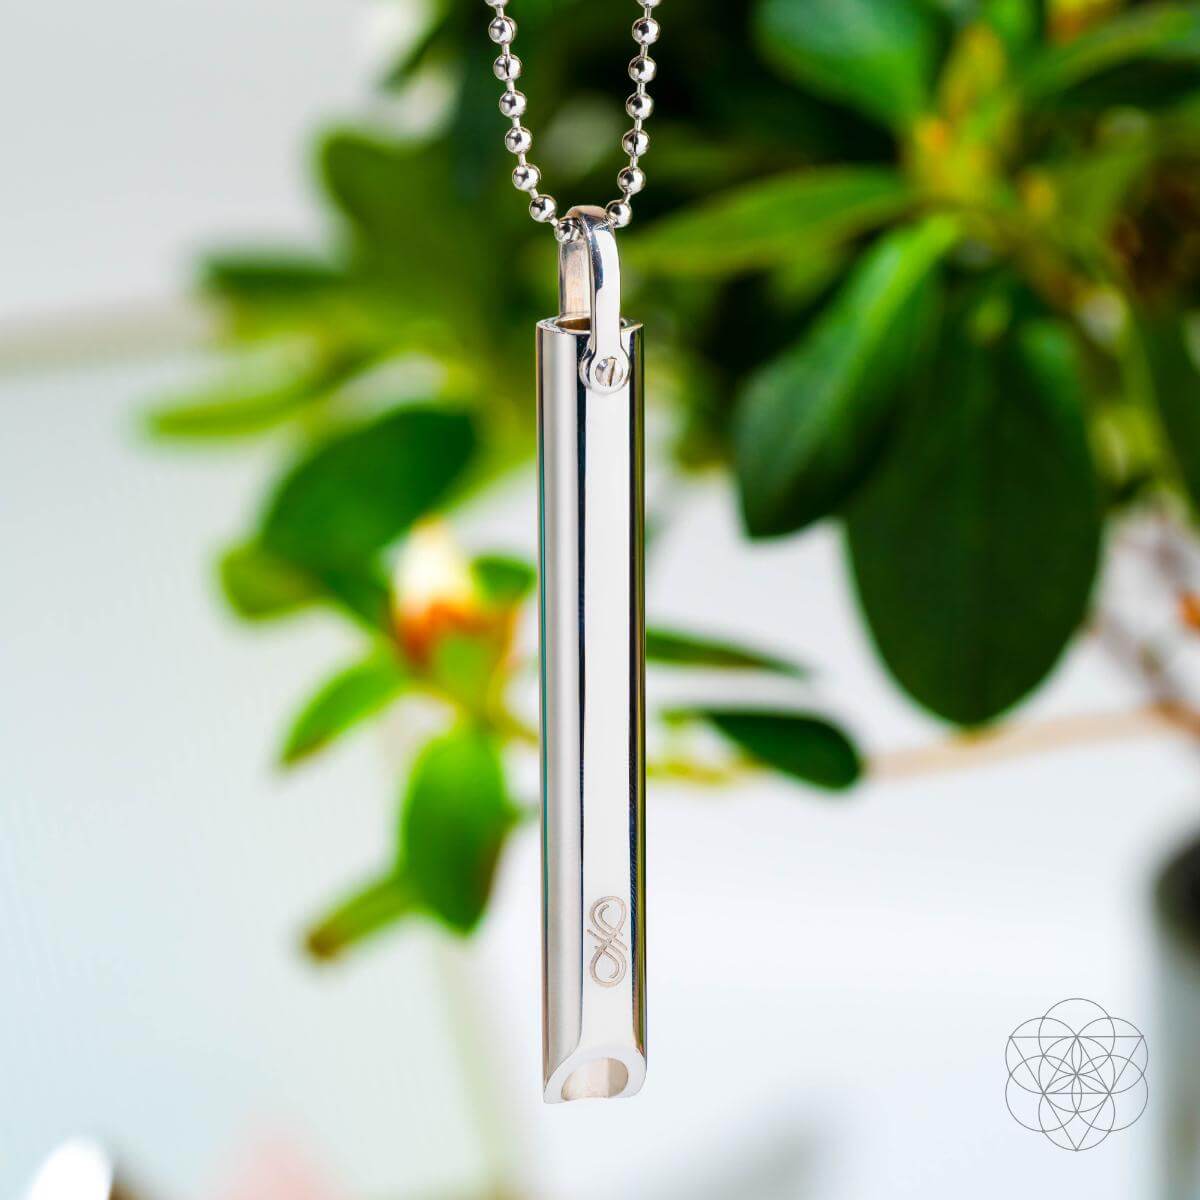 Mindfulness Breathing Necklace - Silver Cycle Breaker